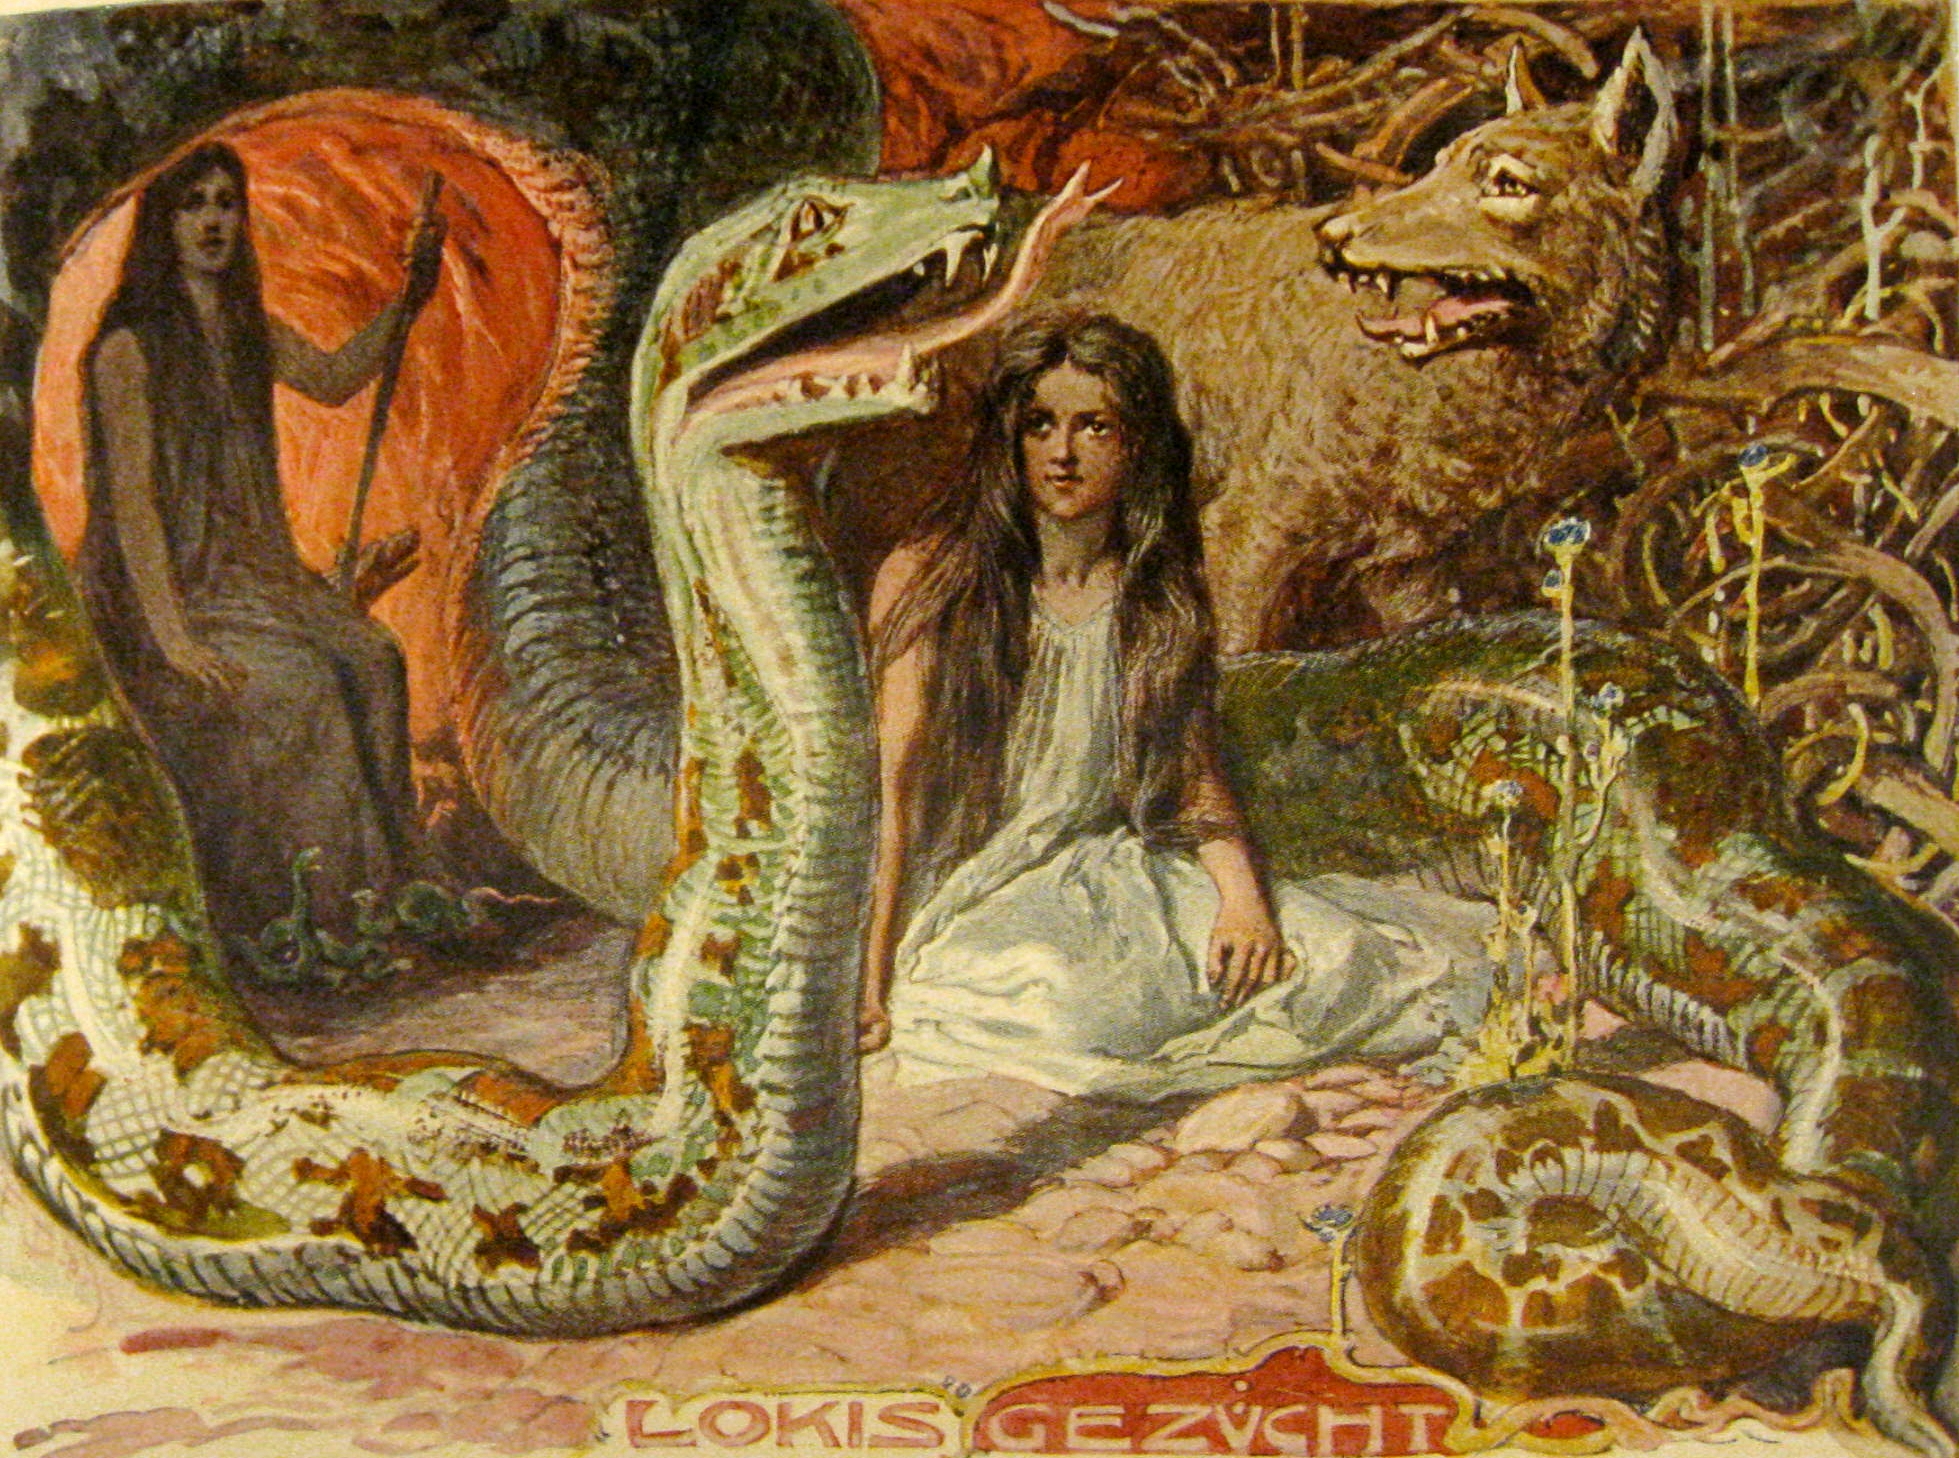 A young girl surrounded by a serpent, wolf, and a ghostly woman